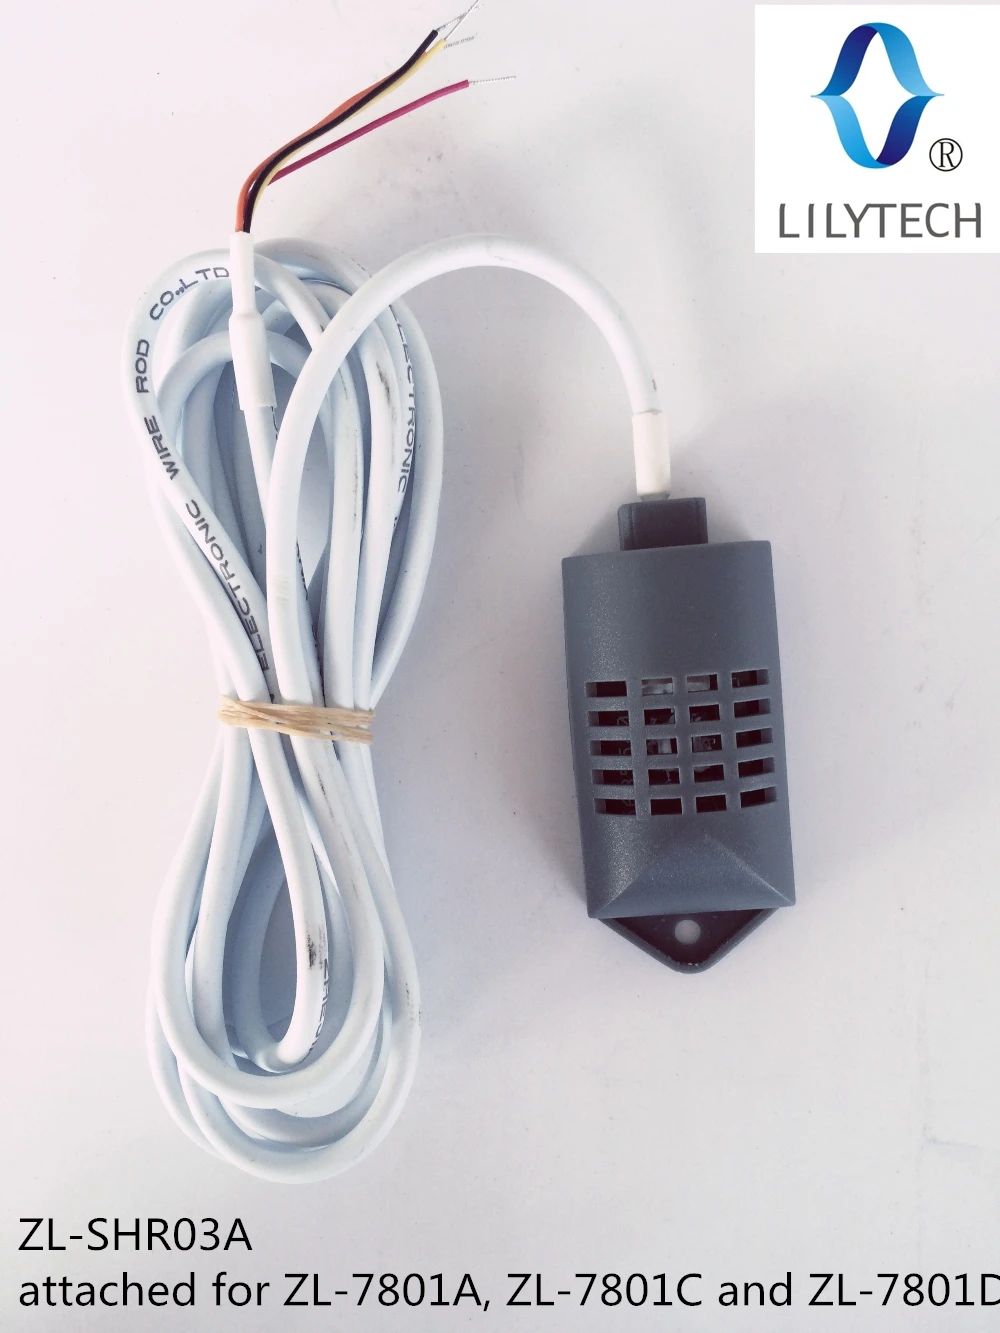 

ZL-SHr03A, Humidity and temperature sensor, for LILYTECH controller